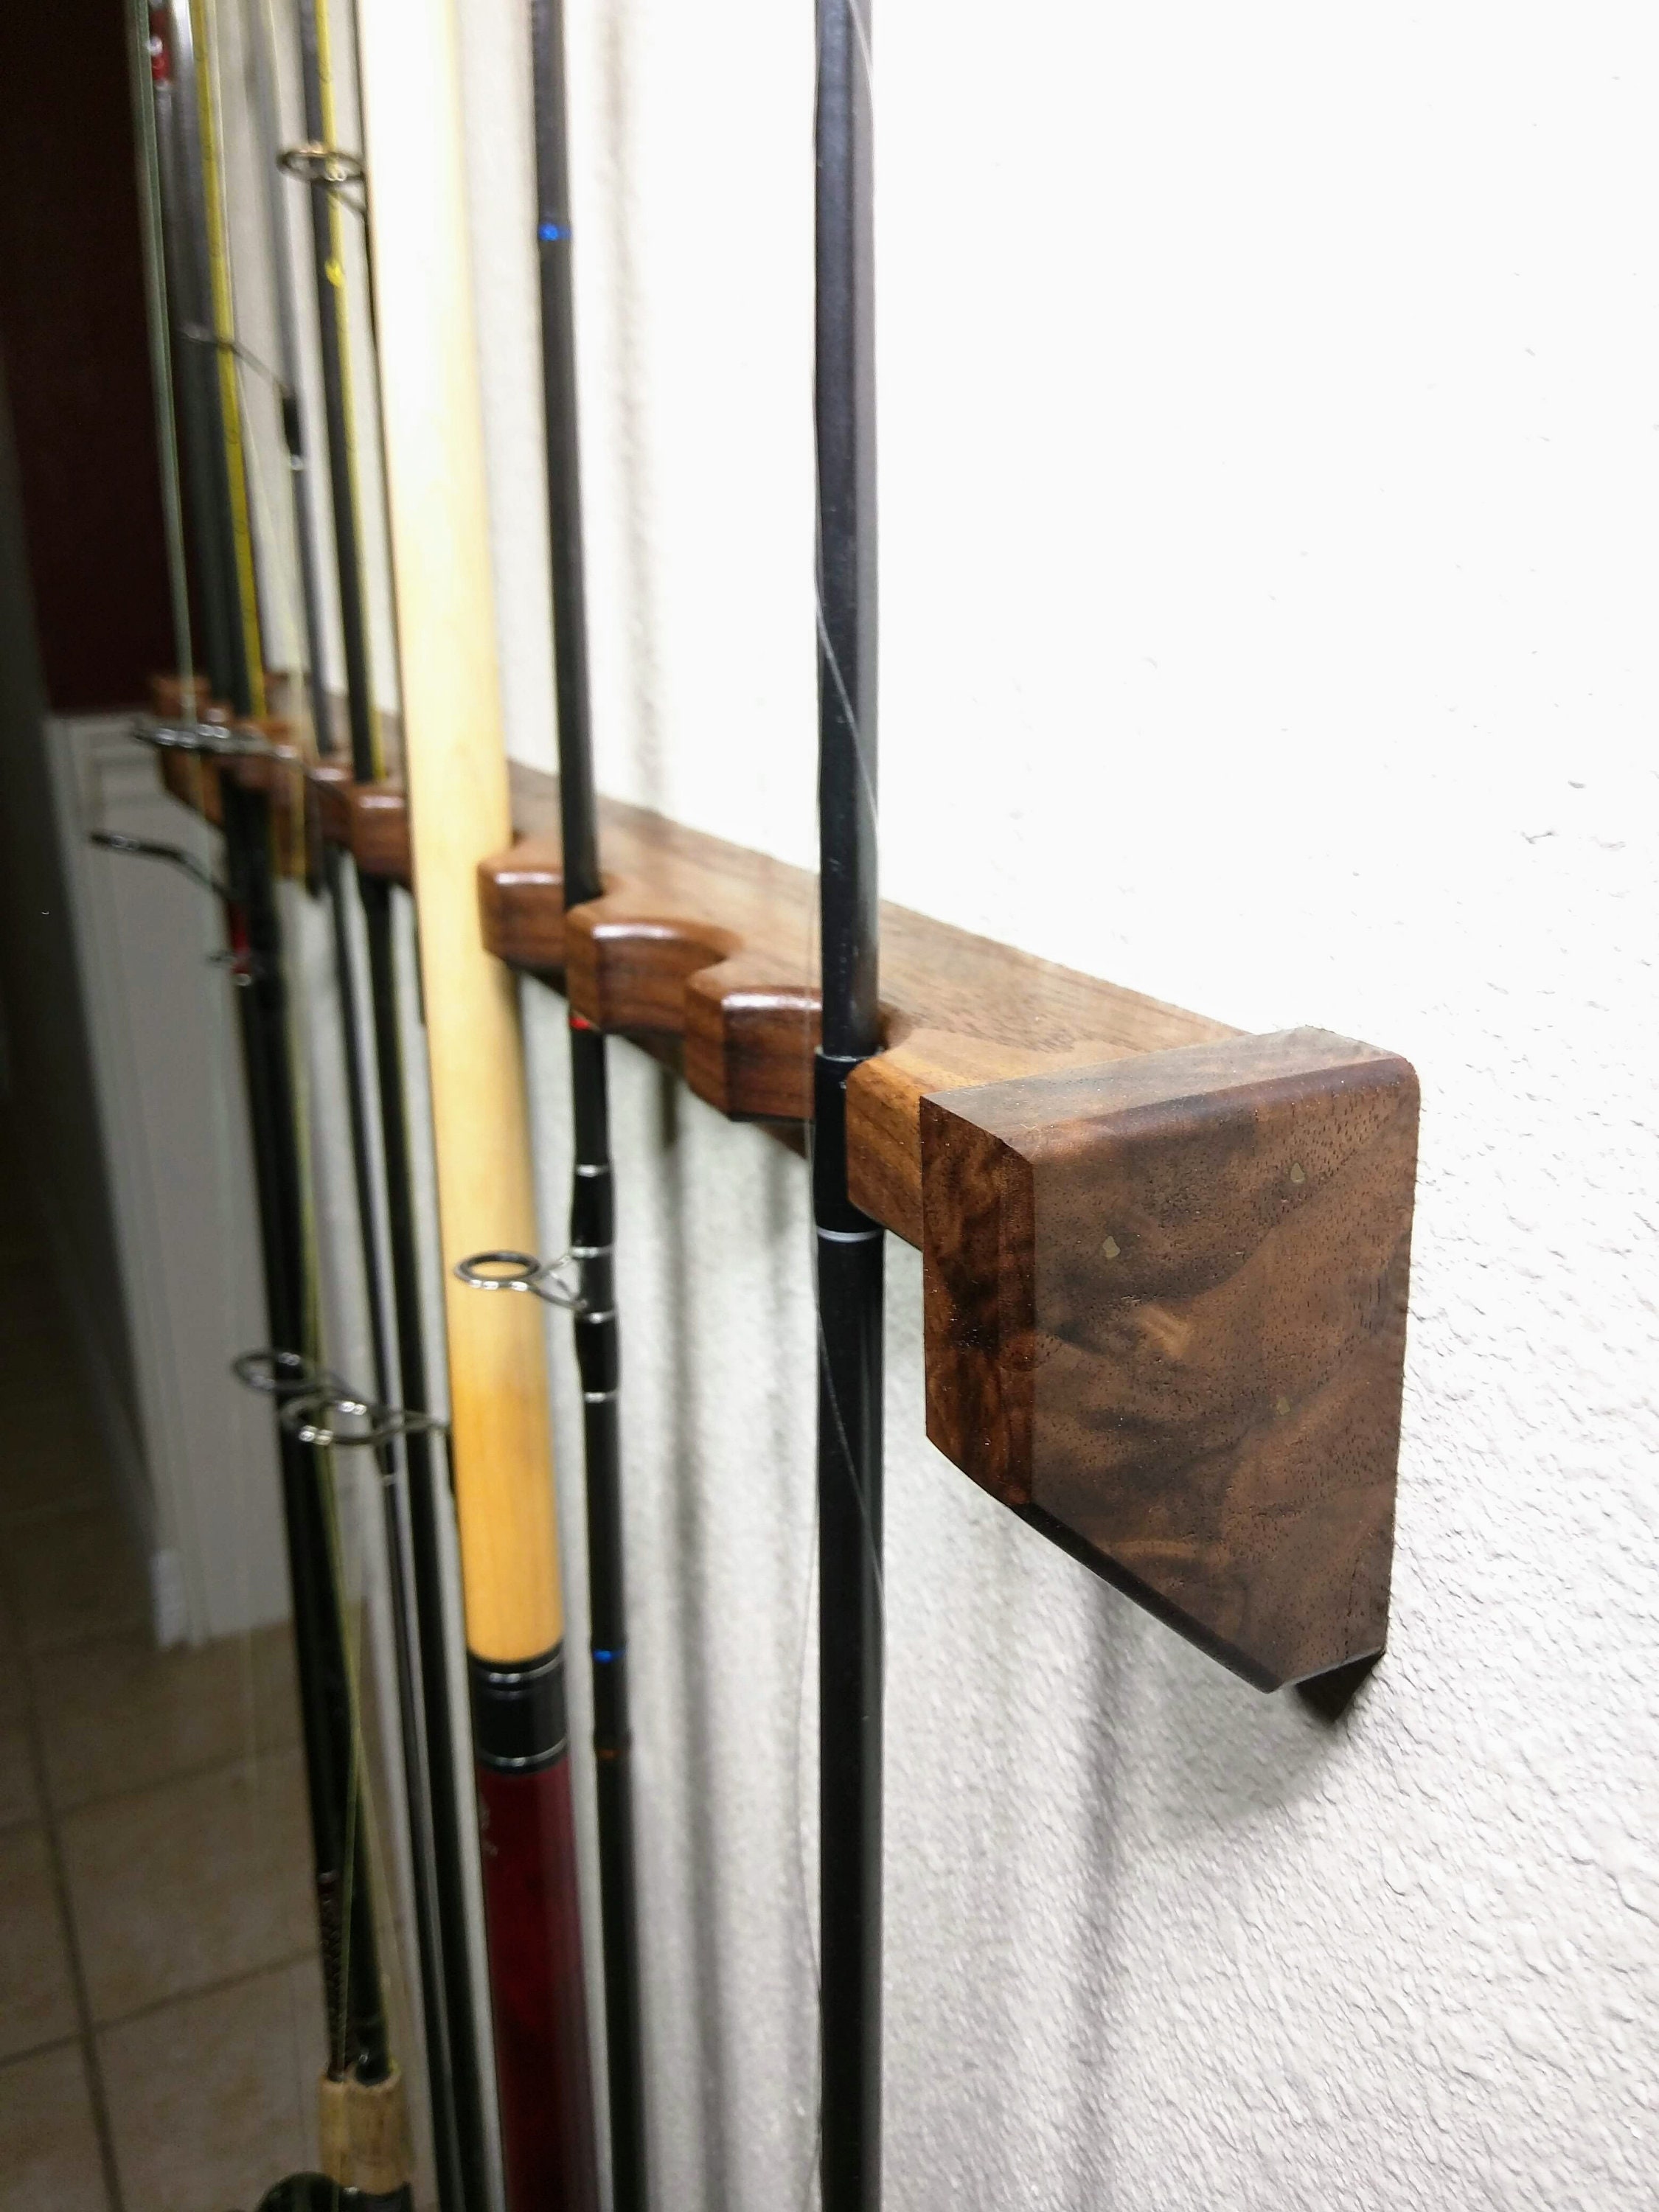 Maple Fishing Rod Rack, Wall Mount Pool Cue Holder, Father's Day Gift for  Fisherman, Outdoorsman, Built in Home Decor 4 Fishing Cabin, Lodge -   Canada